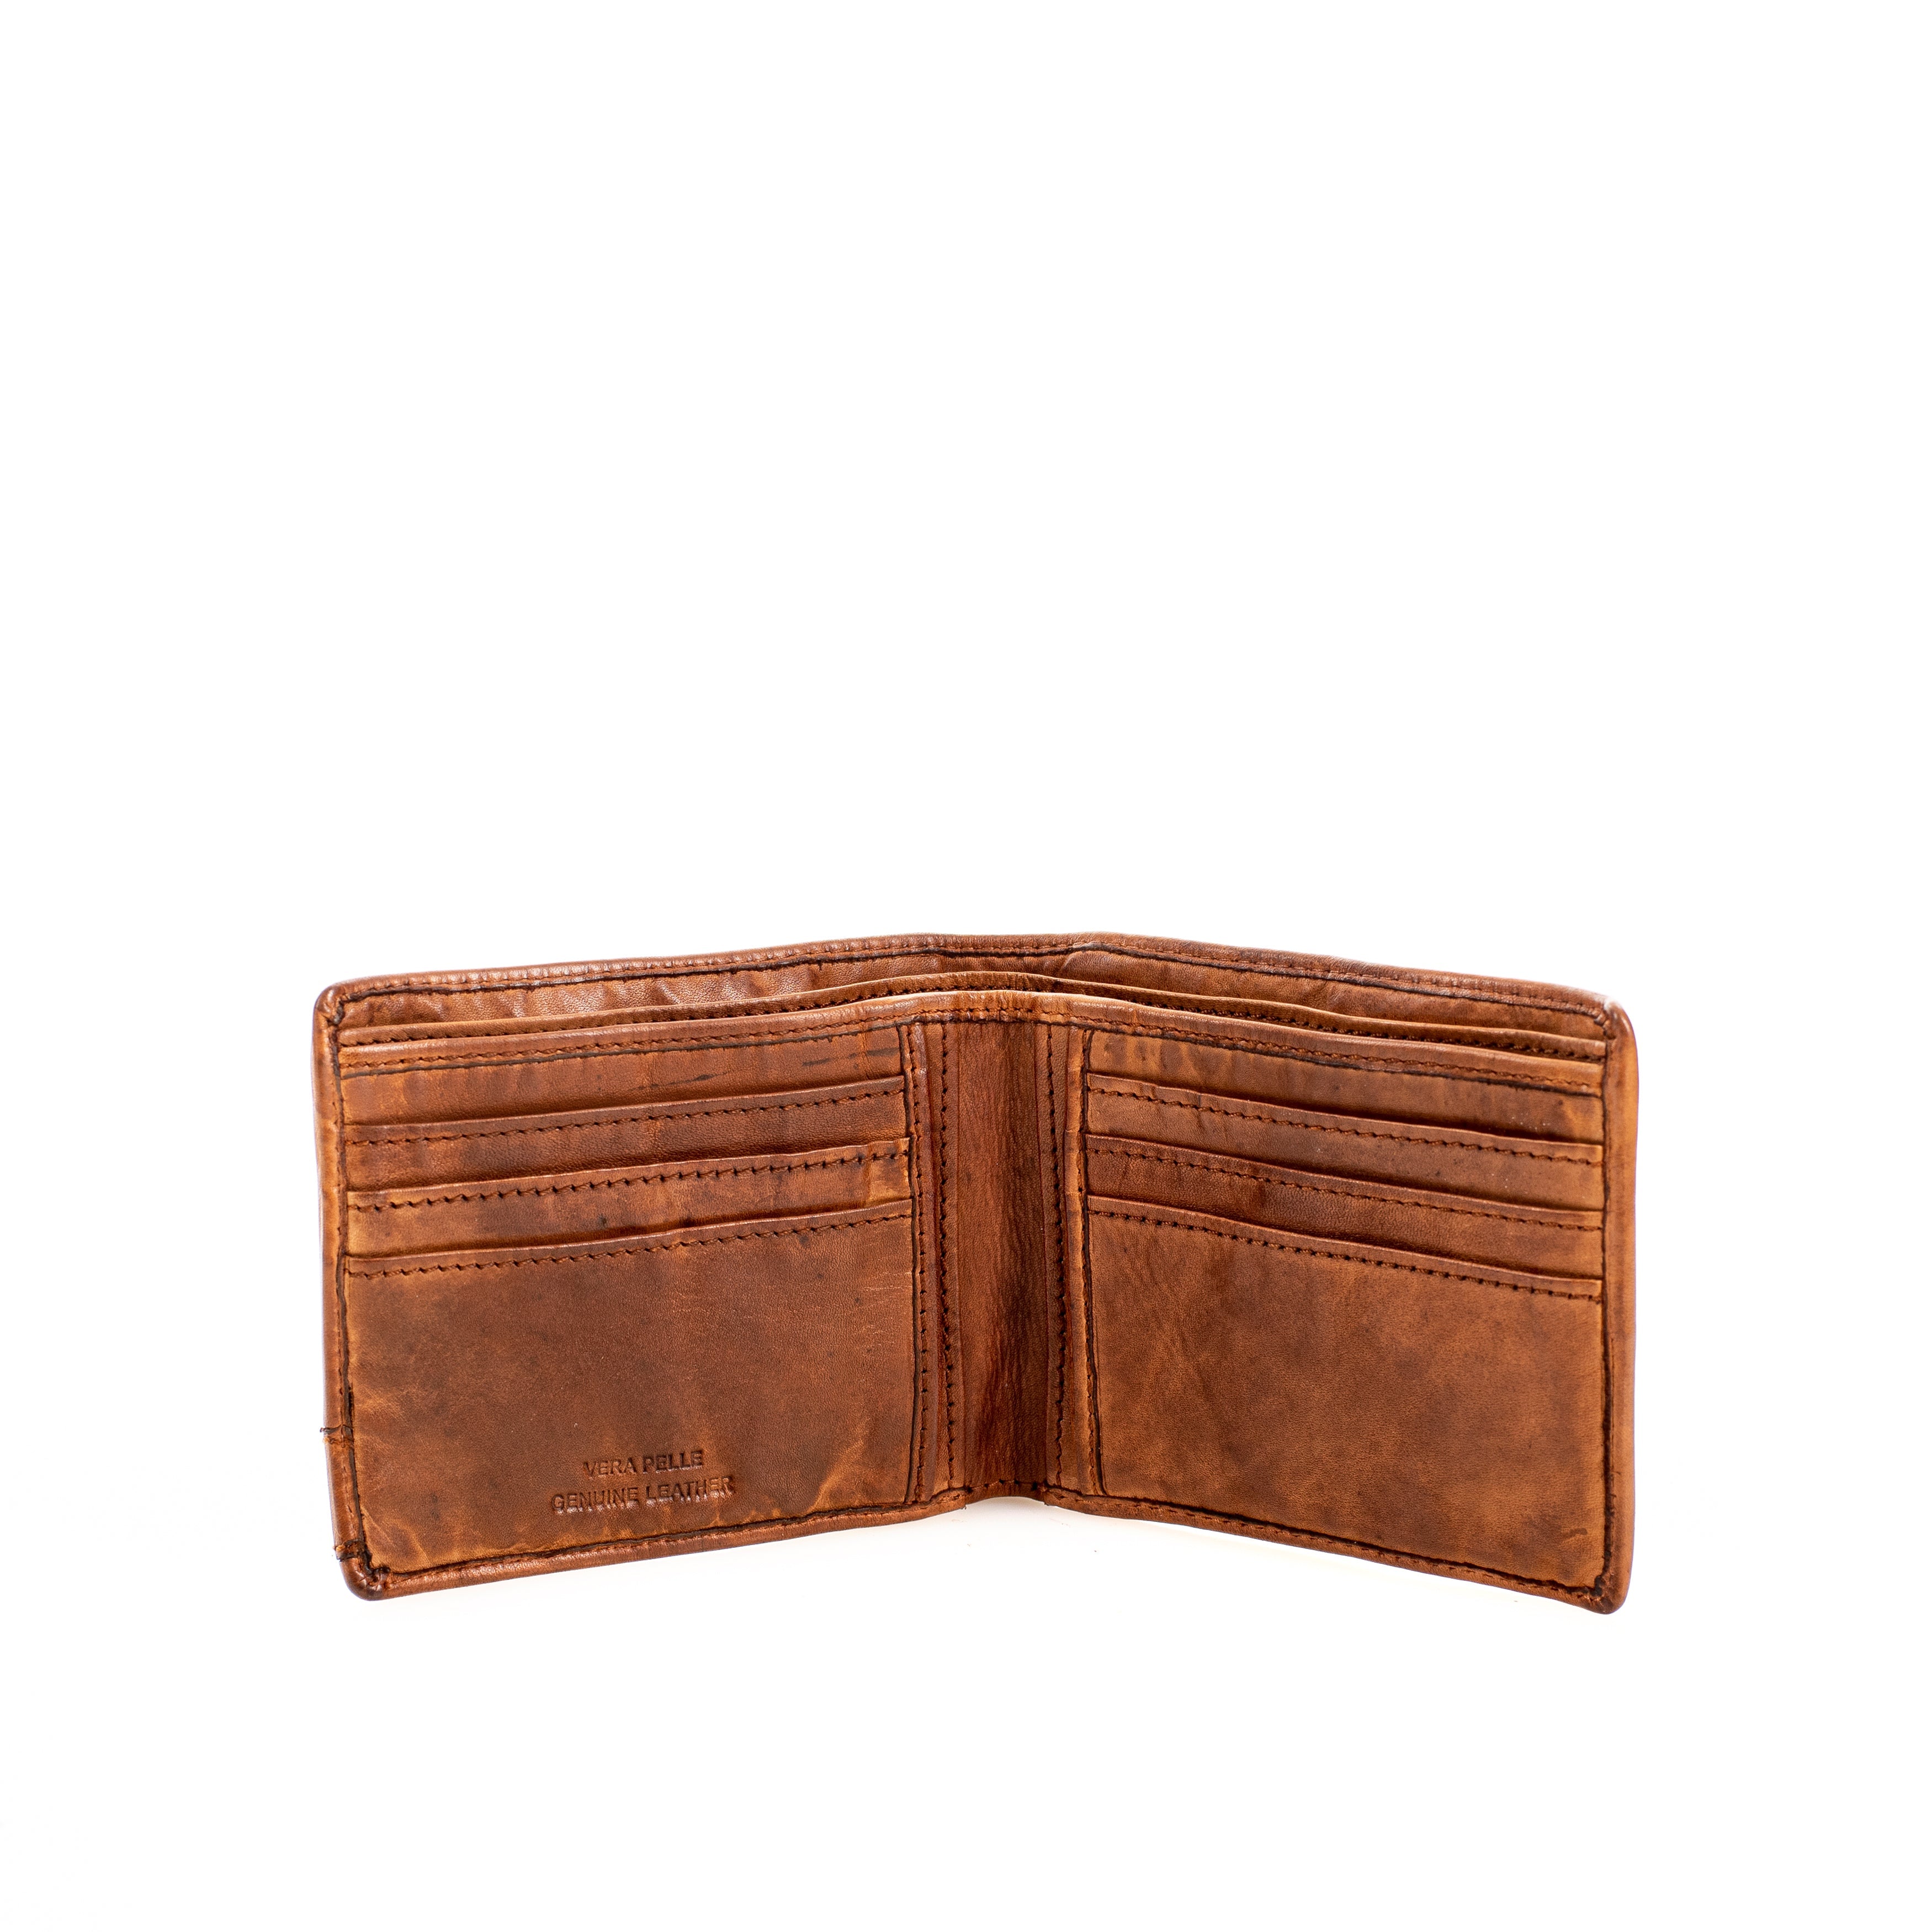 Gianni Conti RAUL Leather Wallet